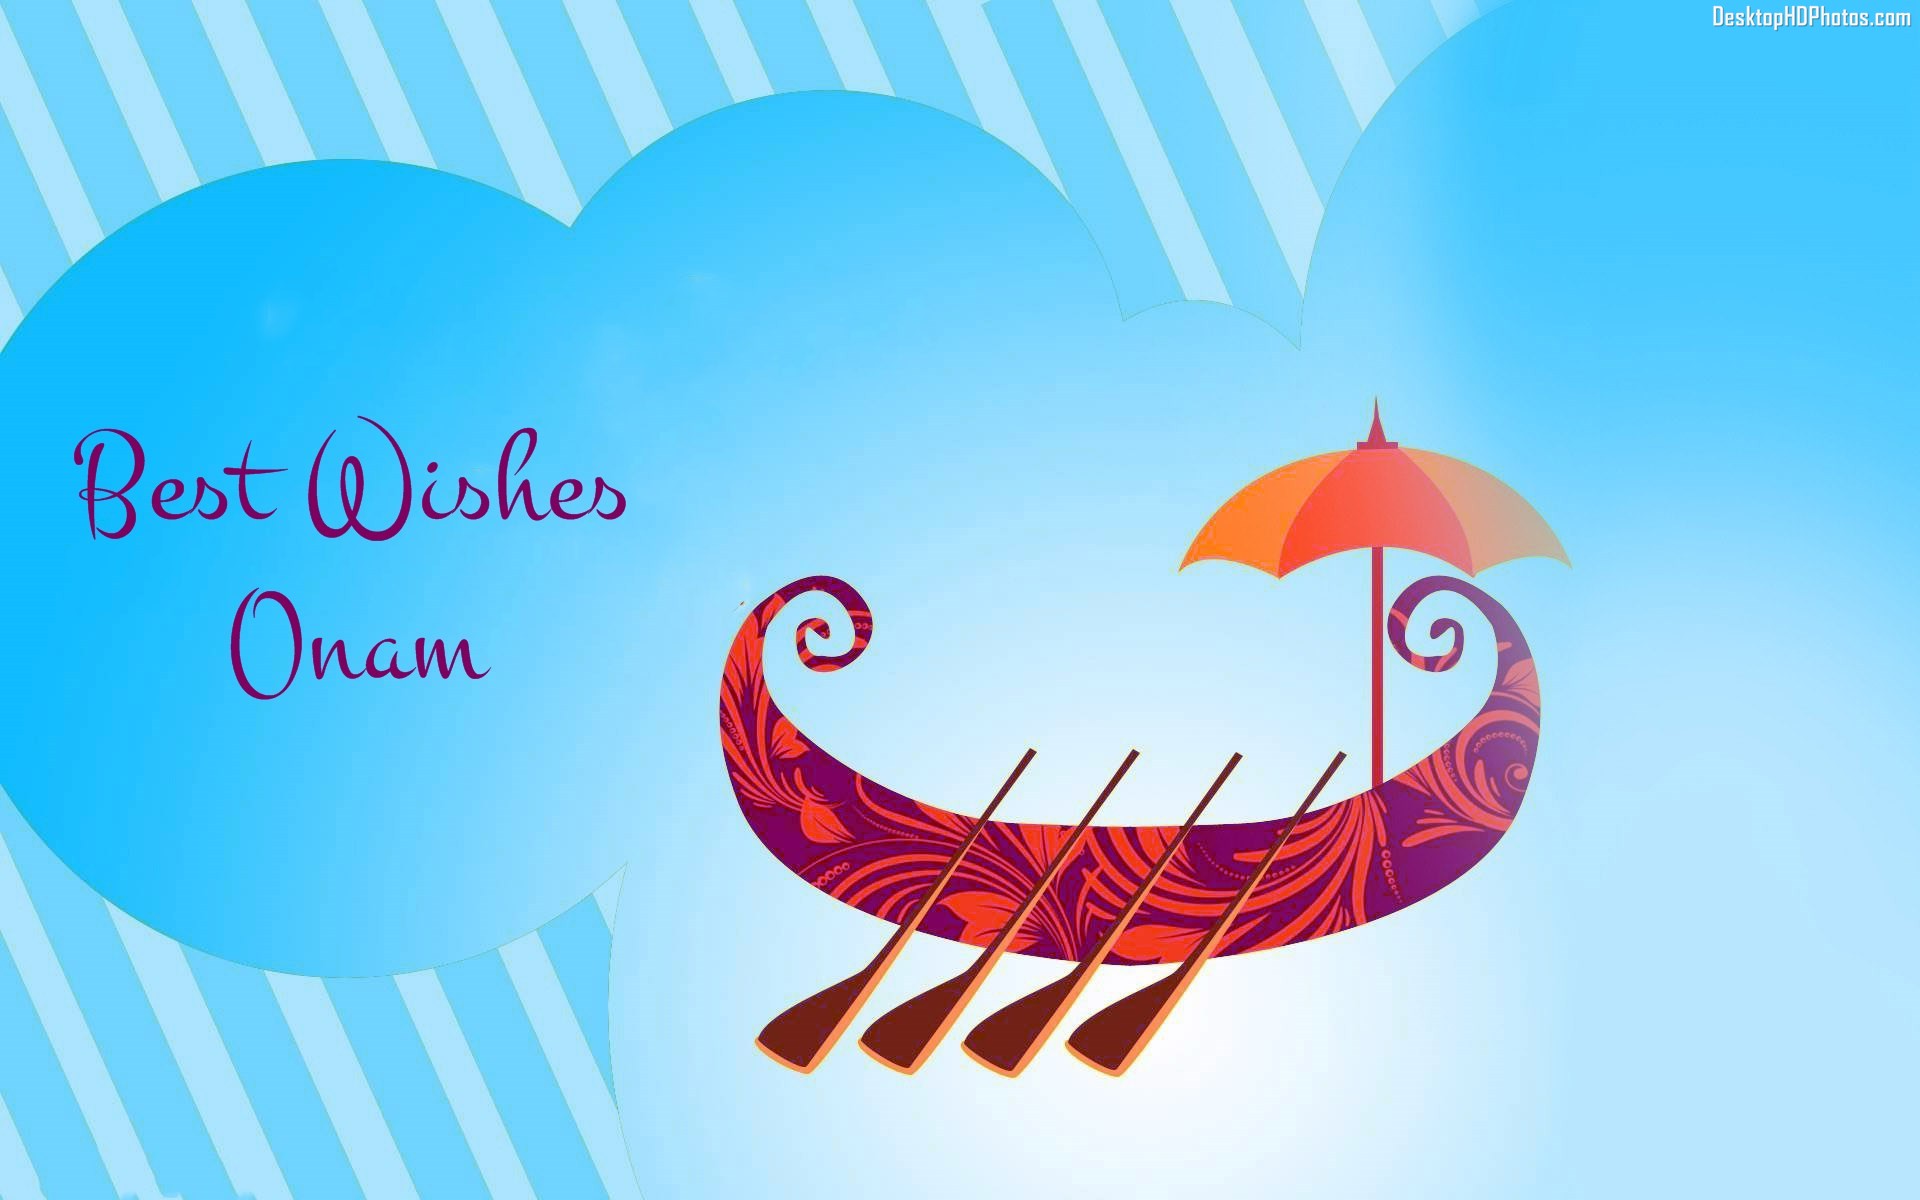 Happy Onam 2015 Images with boat